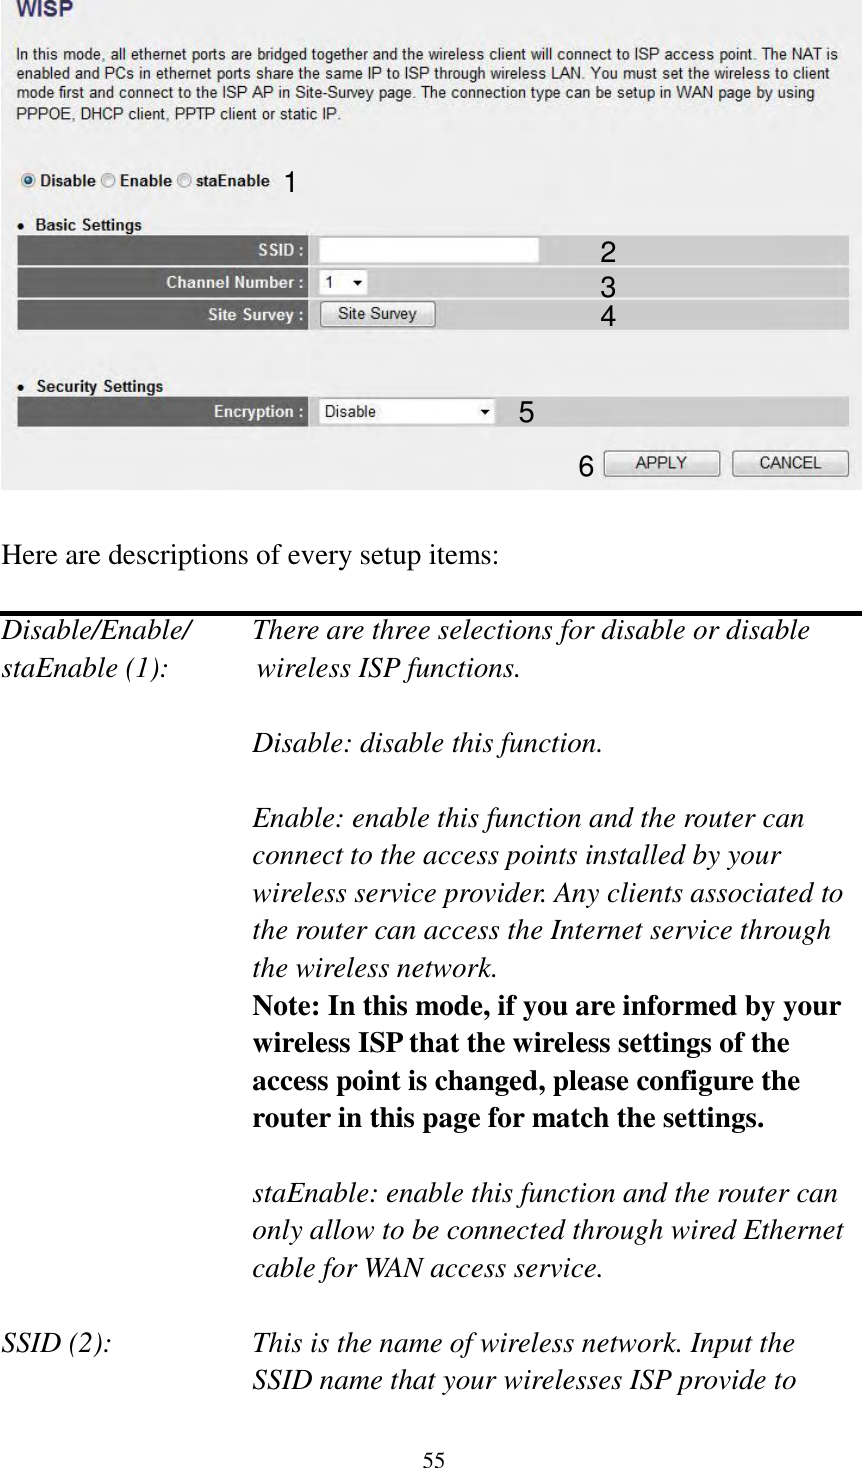 55   Here are descriptions of every setup items:  Disable/Enable/    There are three selections for disable or disable   staEnable (1):            wireless ISP functions.  Disable: disable this function.  Enable: enable this function and the router can connect to the access points installed by your wireless service provider. Any clients associated to the router can access the Internet service through the wireless network. Note: In this mode, if you are informed by your wireless ISP that the wireless settings of the access point is changed, please configure the router in this page for match the settings.  staEnable: enable this function and the router can only allow to be connected through wired Ethernet cable for WAN access service.  SSID (2):    This is the name of wireless network. Input the SSID name that your wirelesses ISP provide to 1 2 3 4 5 6 